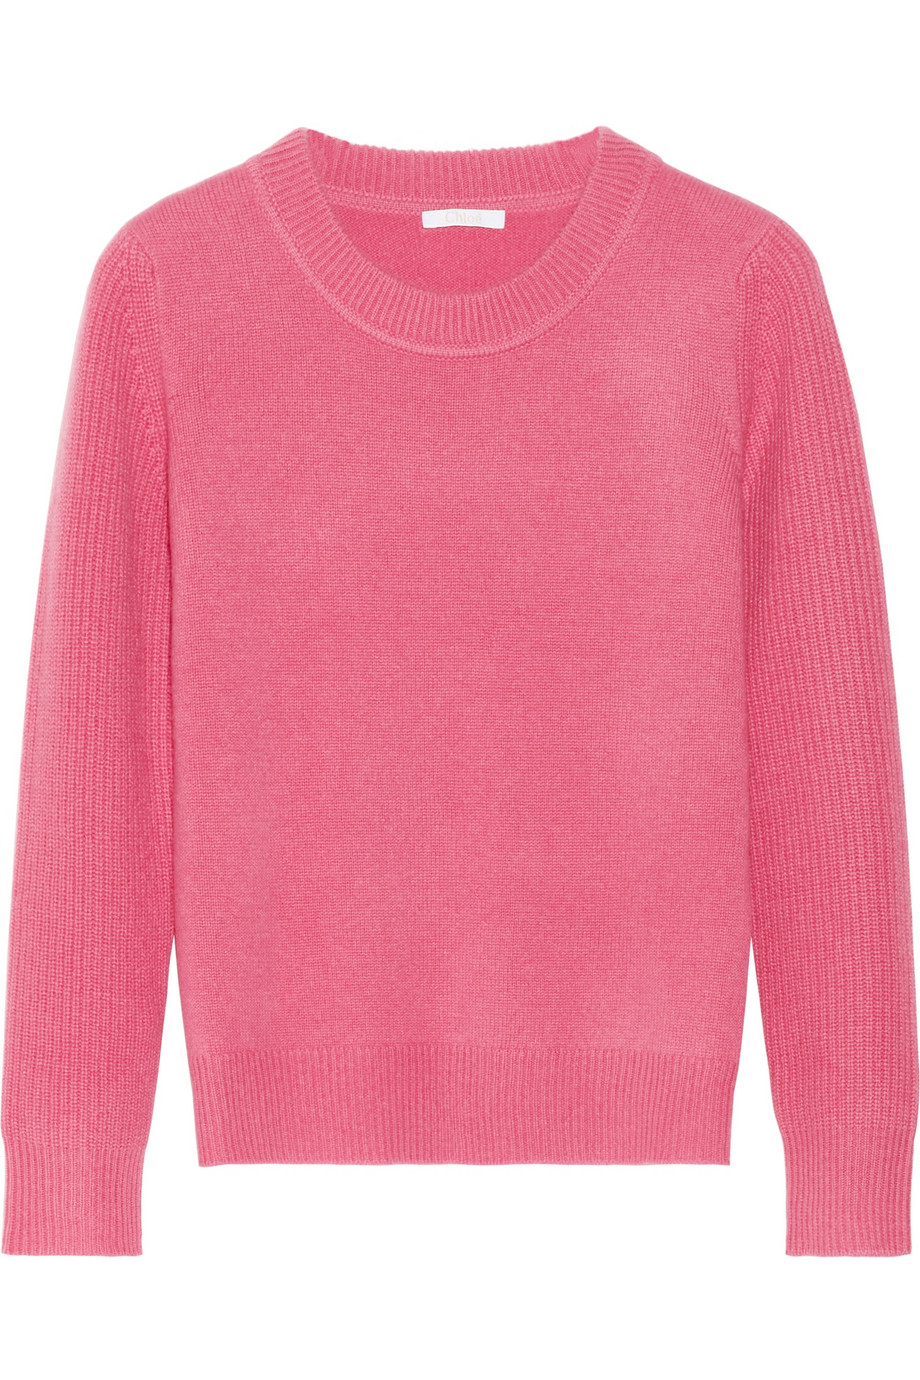 Lyst - Chloé Cashmere Sweater in Pink